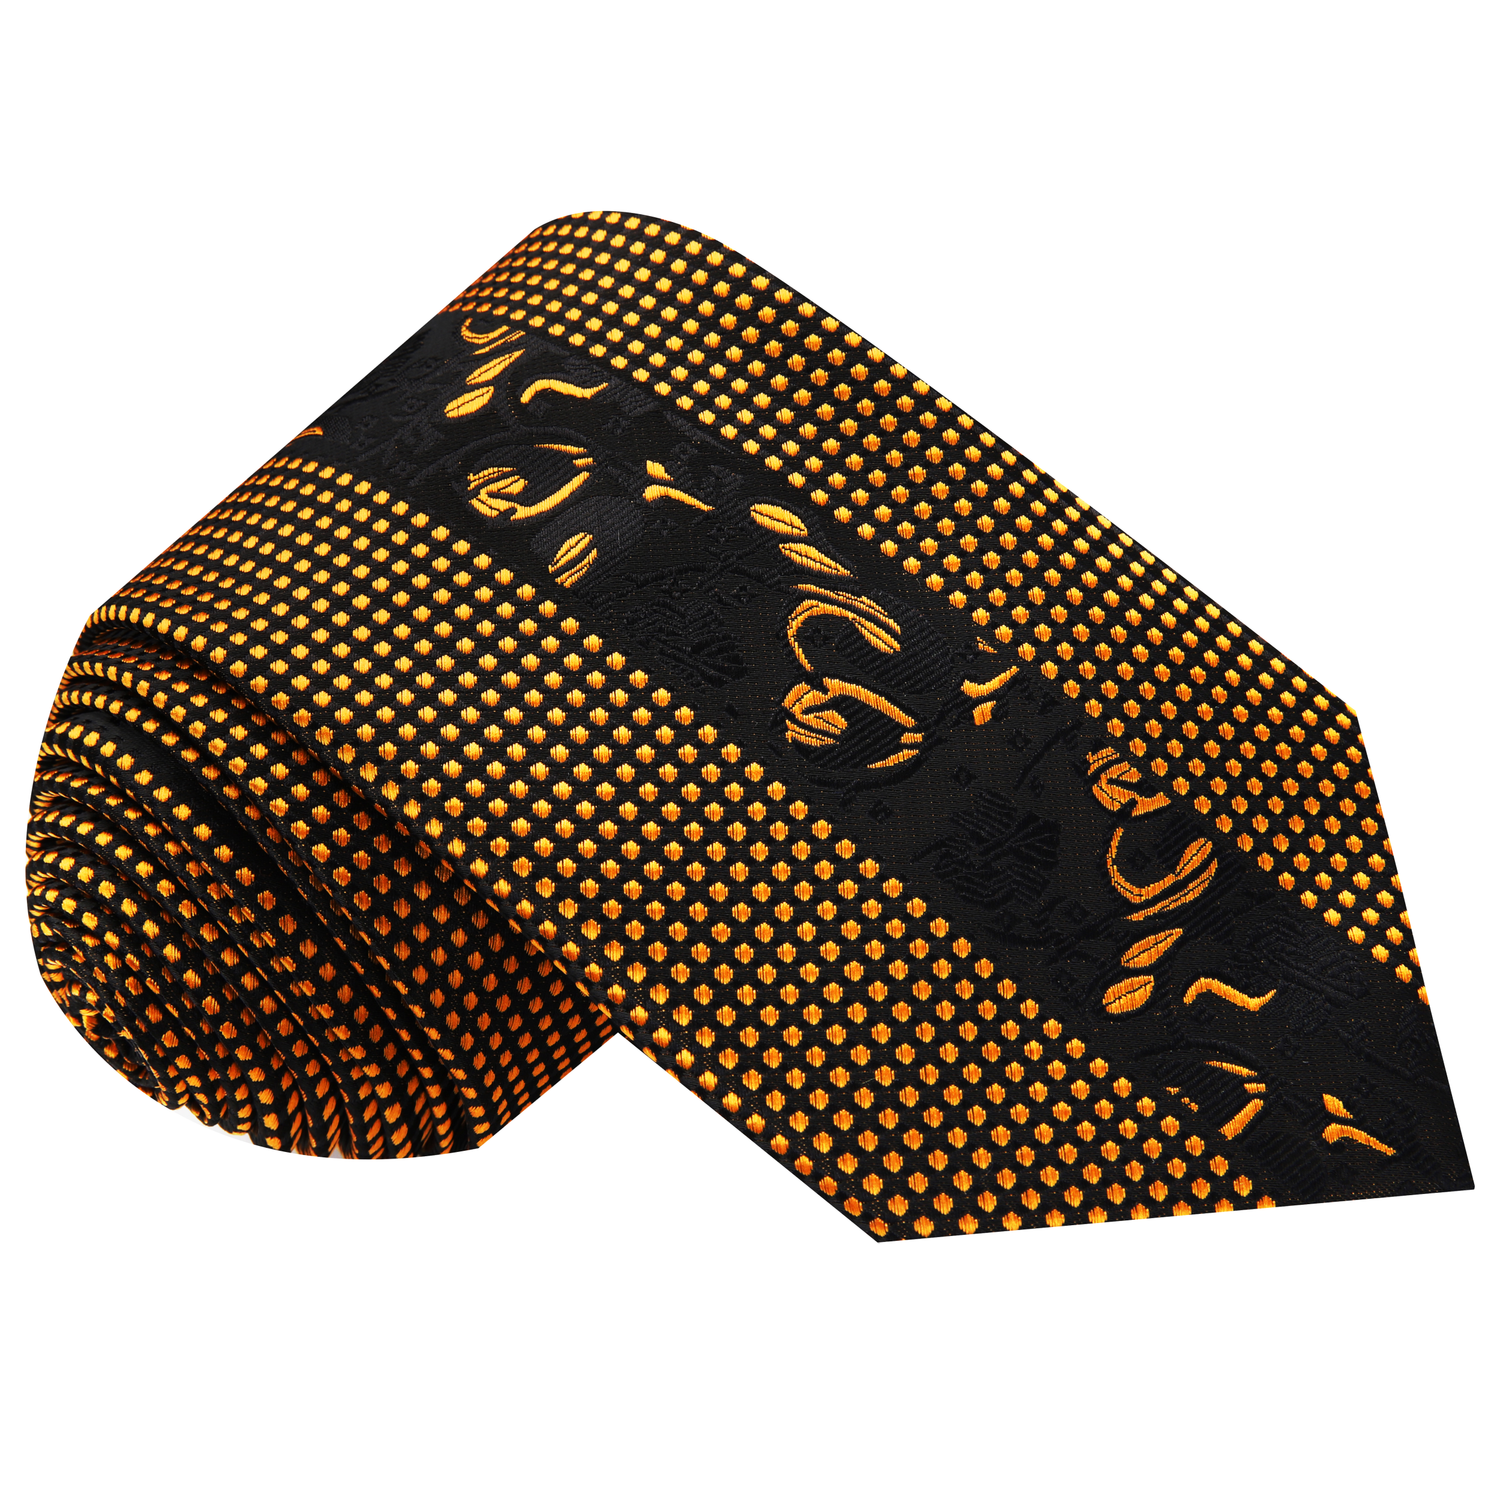 Black & Gold Floral and Check Necktie 